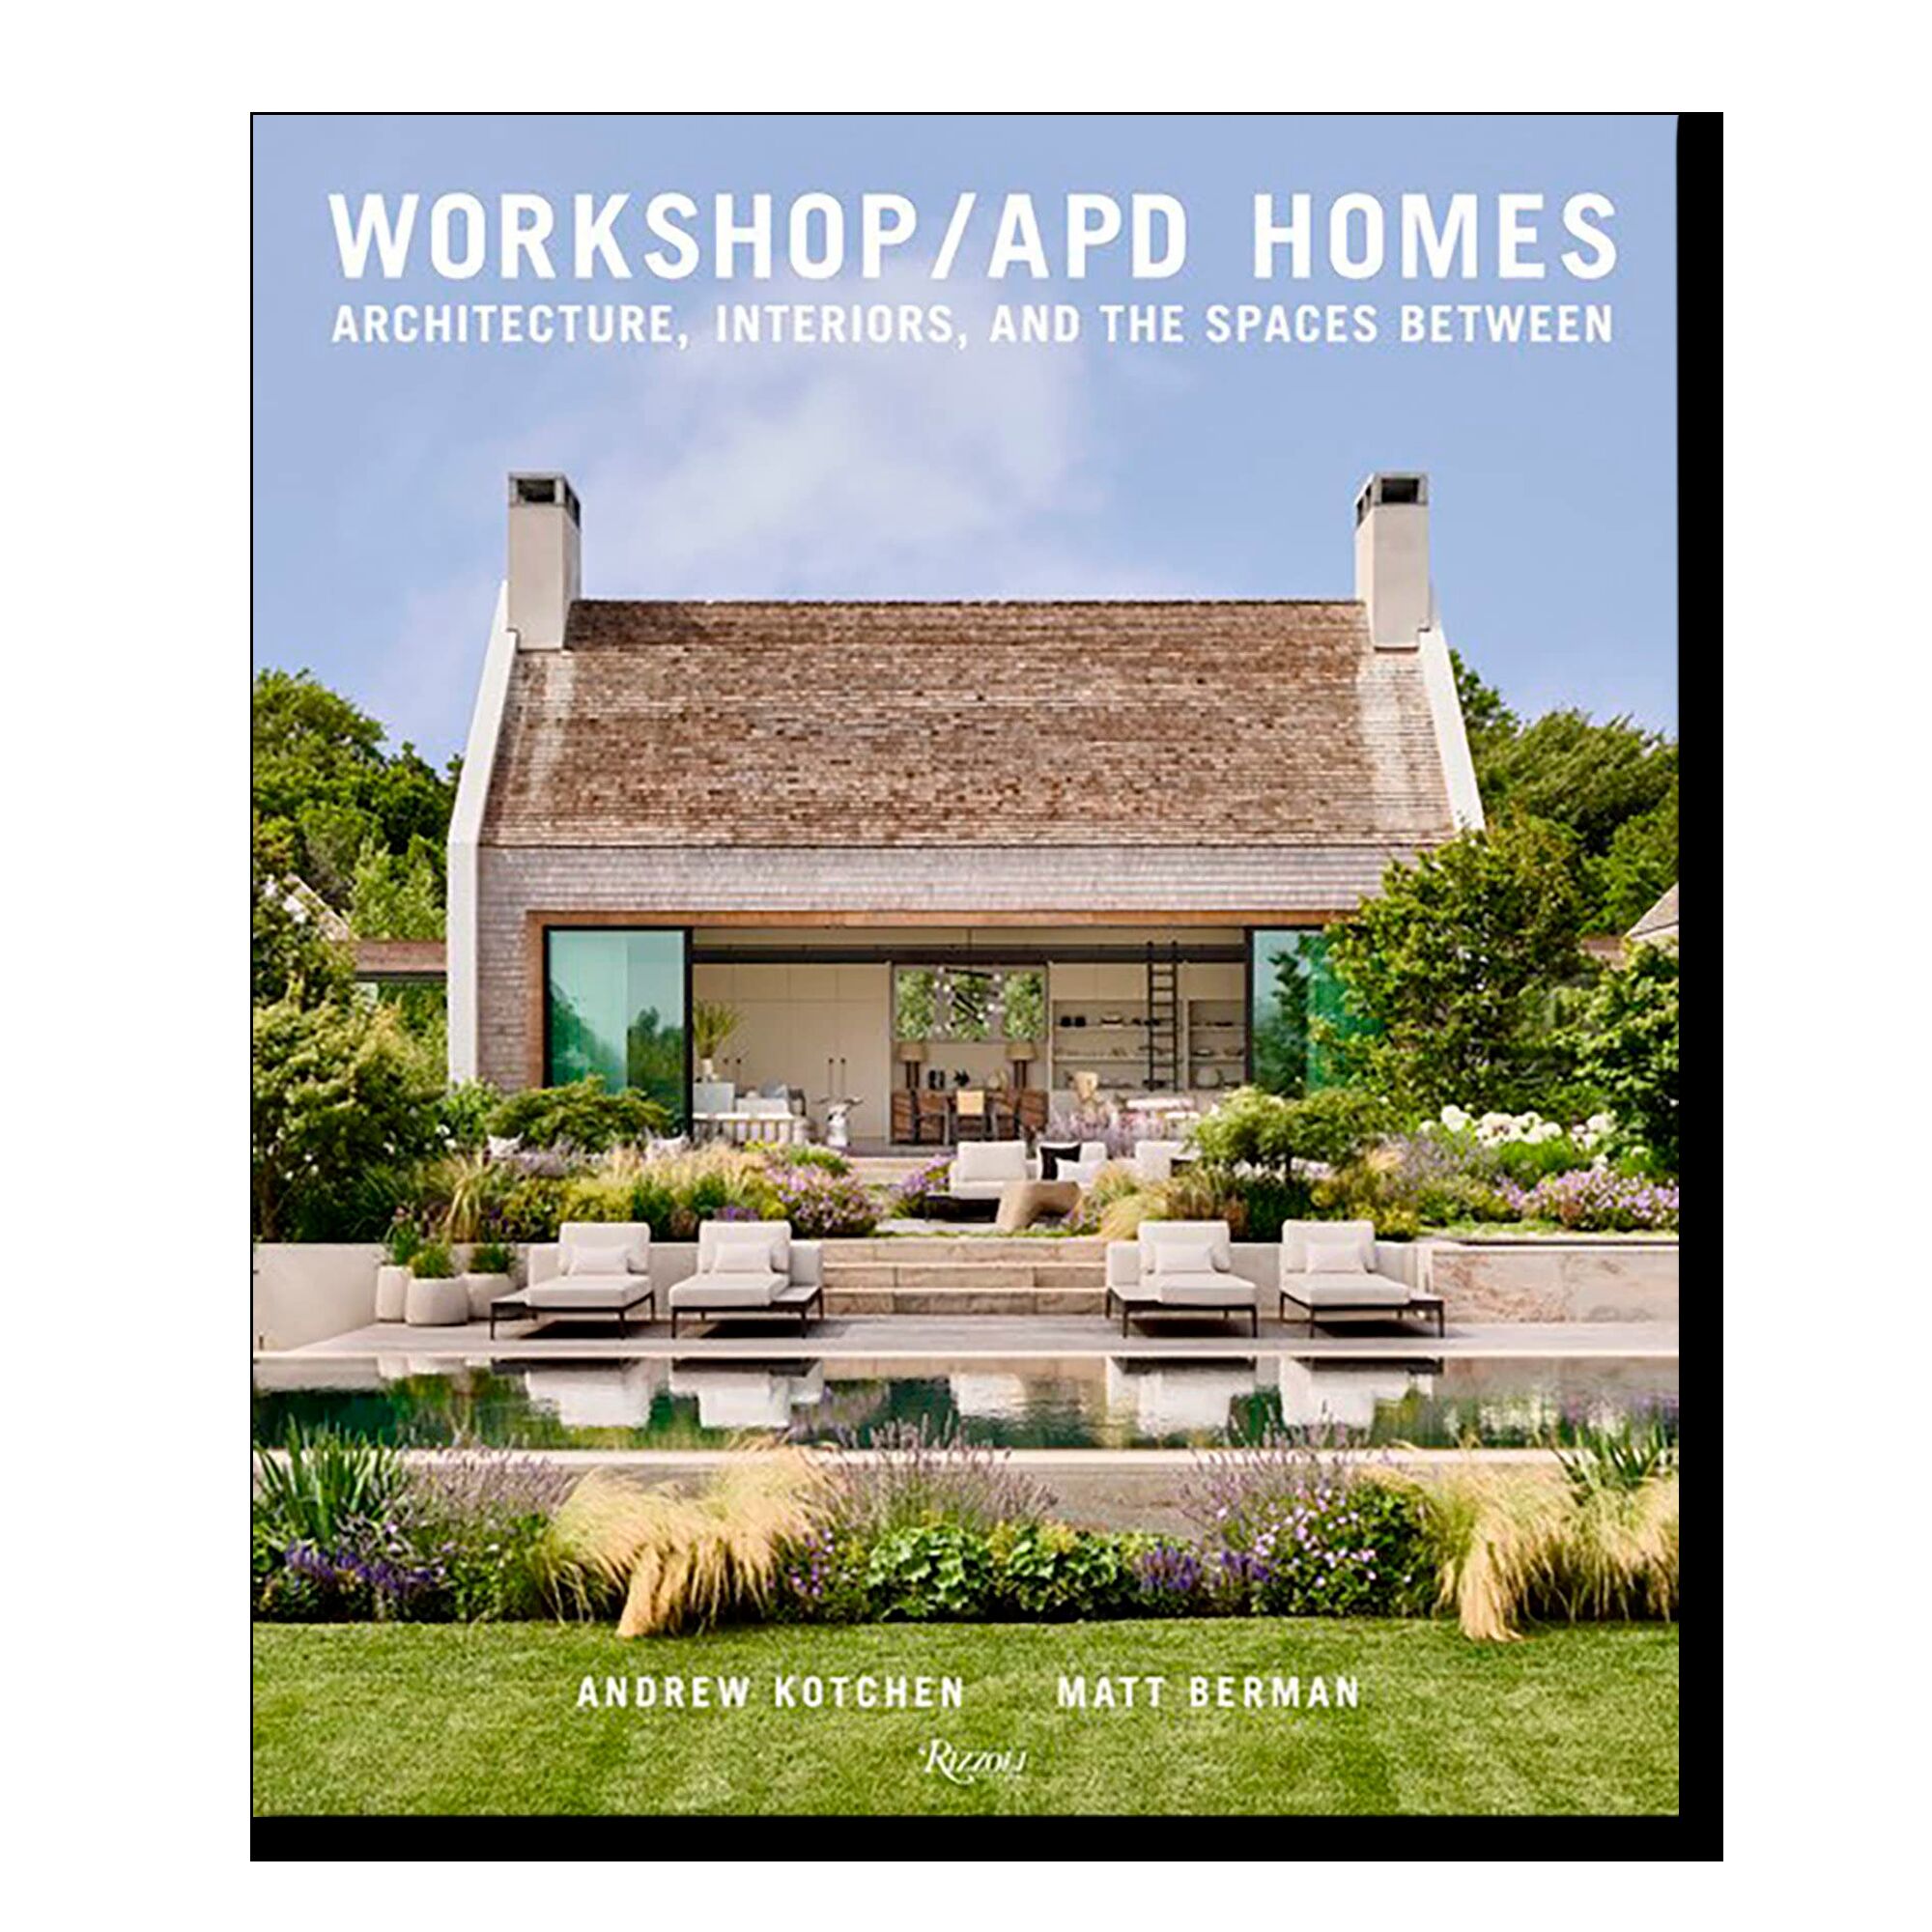 Workshop/APD Homes: Architecture, Interiors, and the Spaces Between